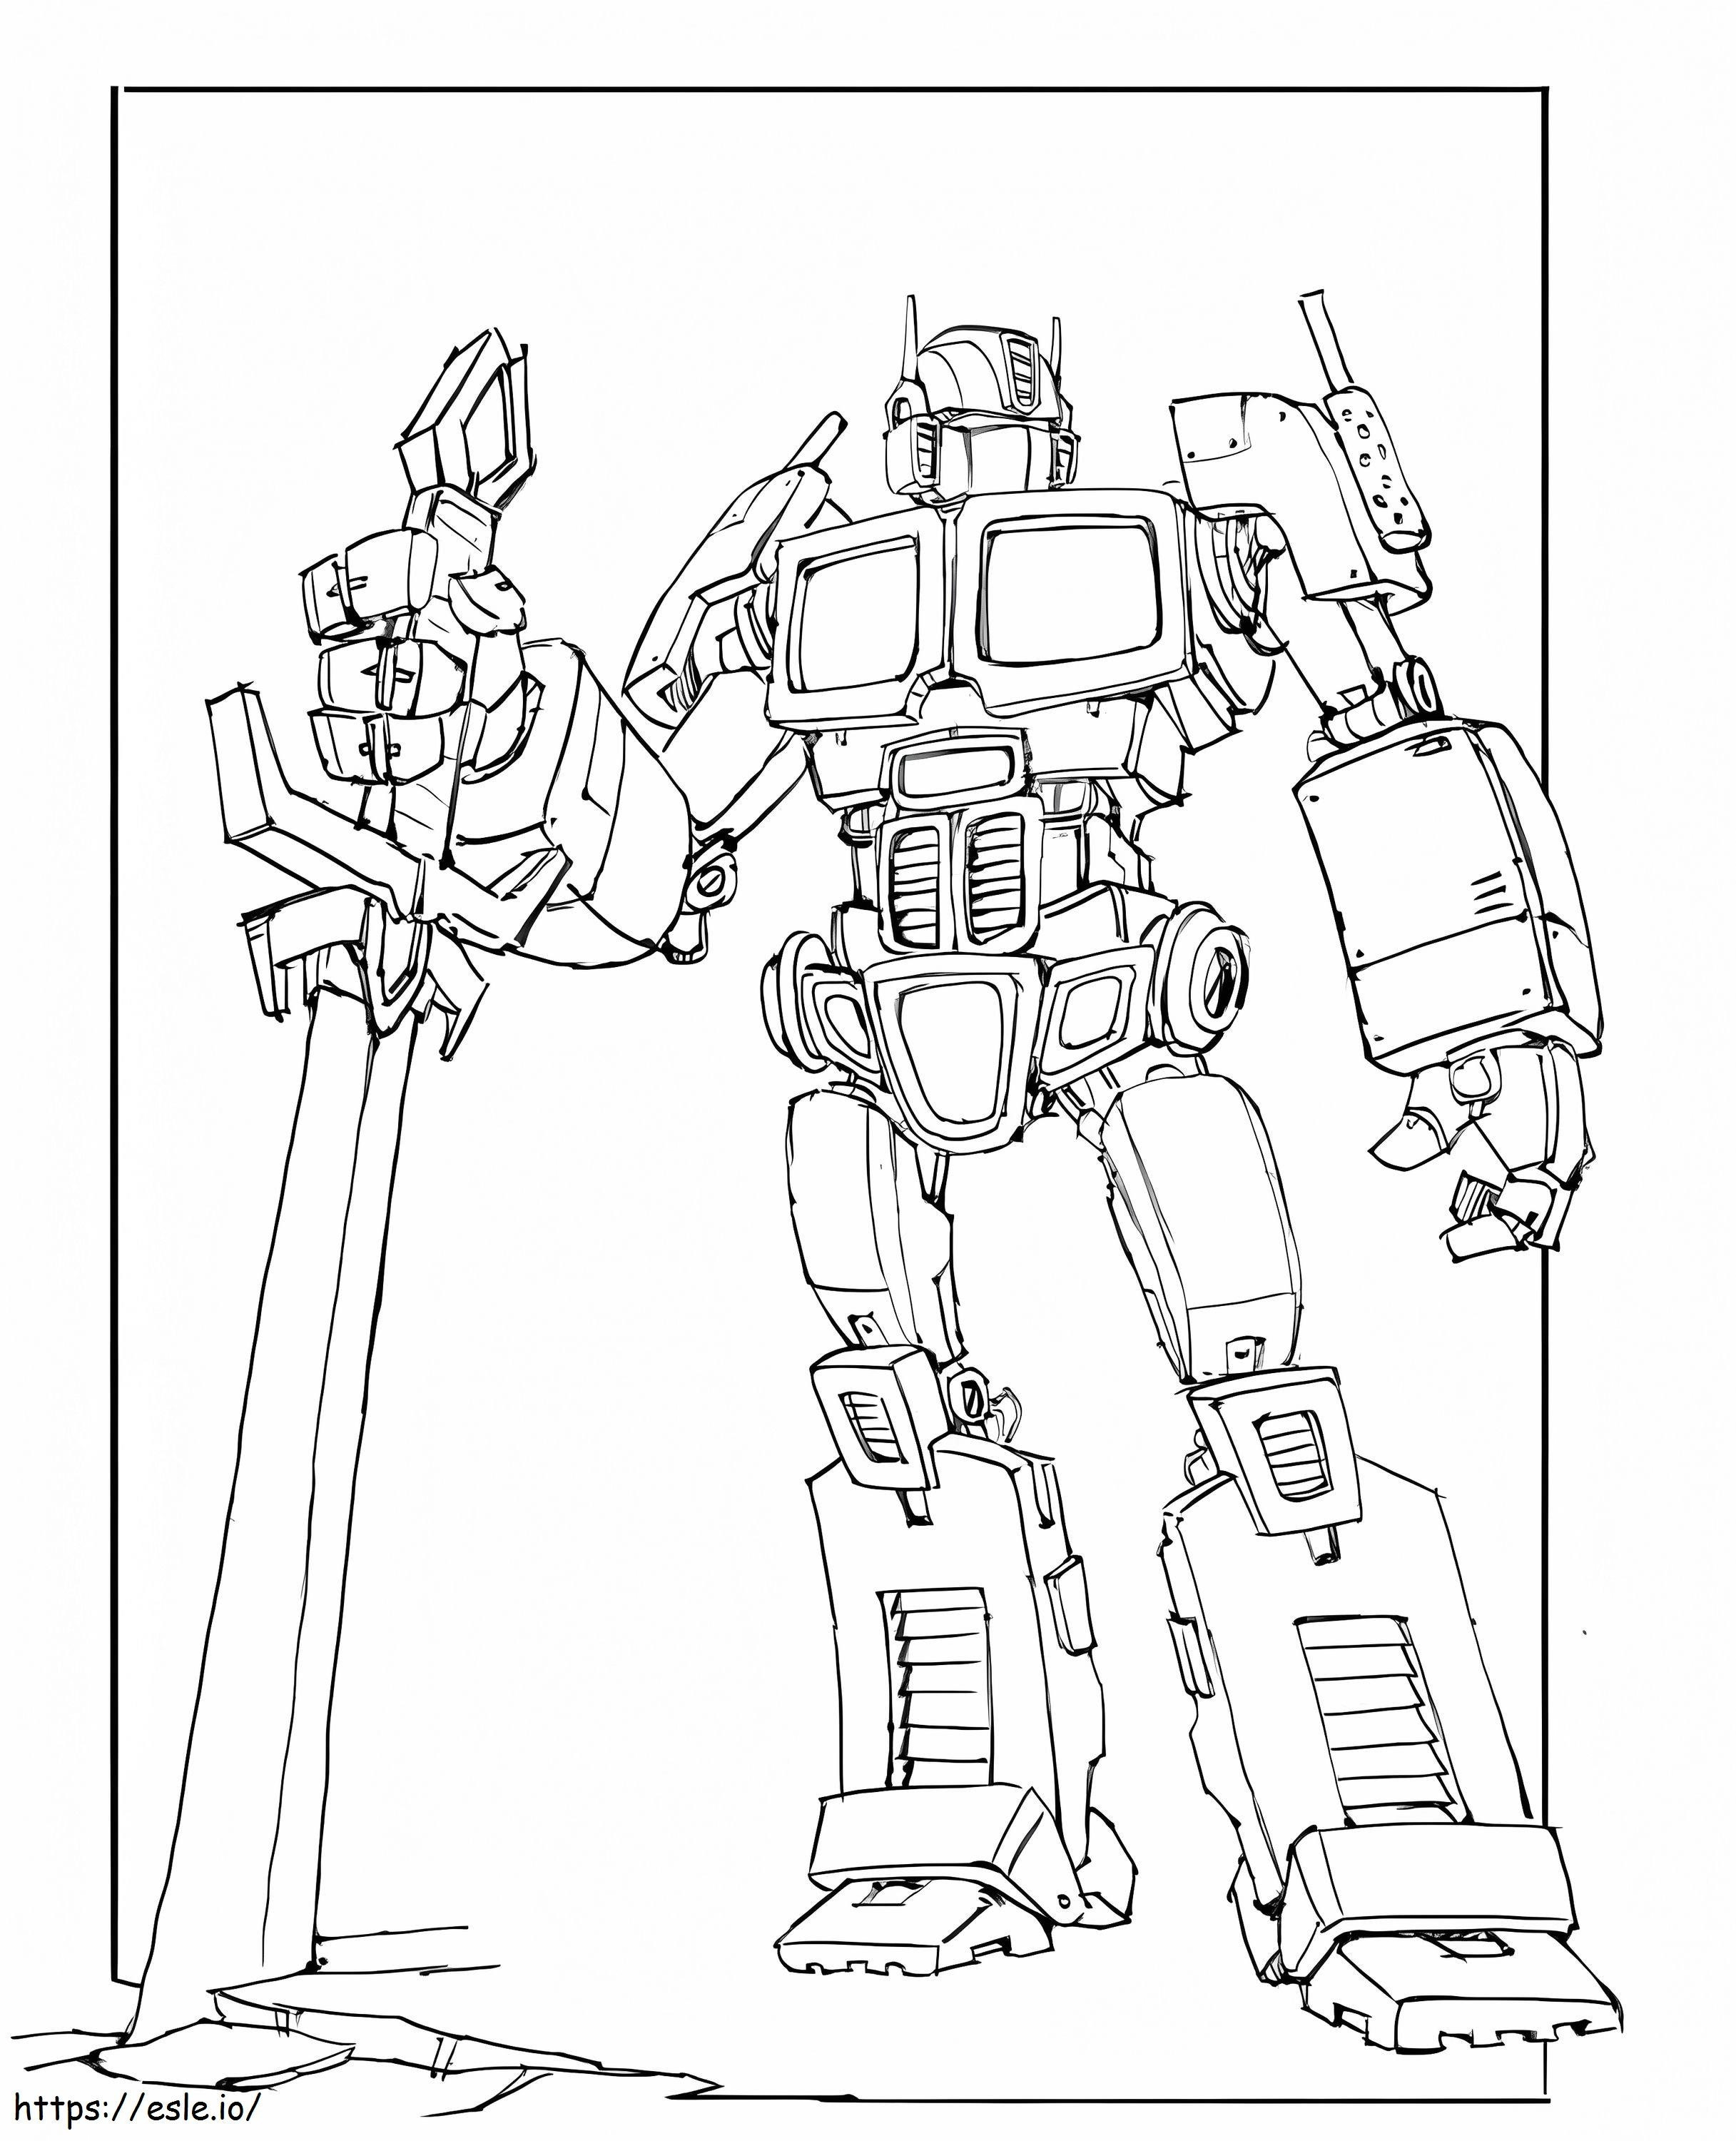 Optimus Prime With Sword coloring page